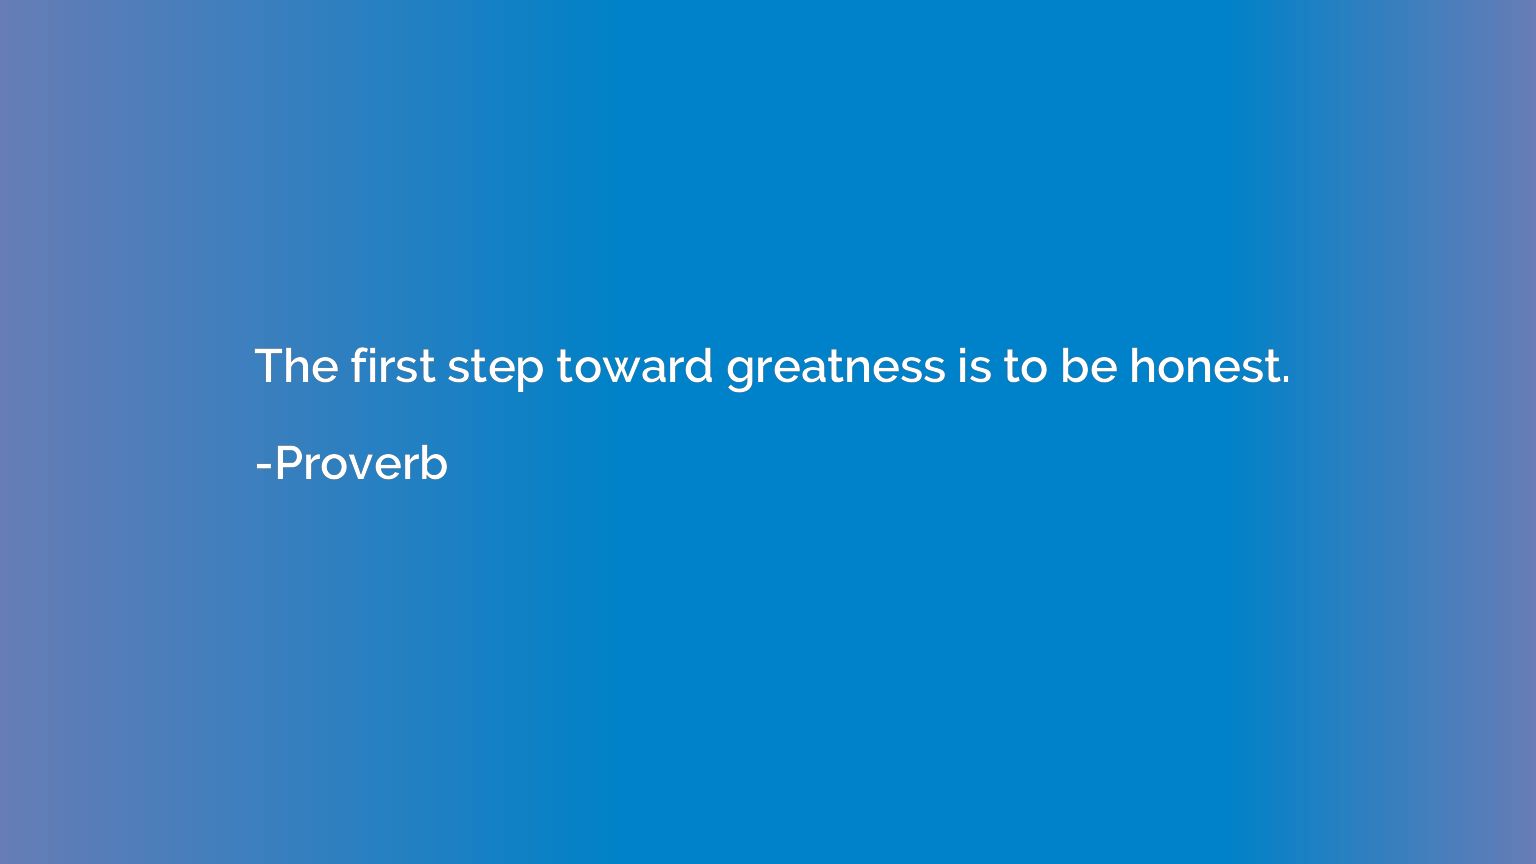 The first step toward greatness is to be honest.